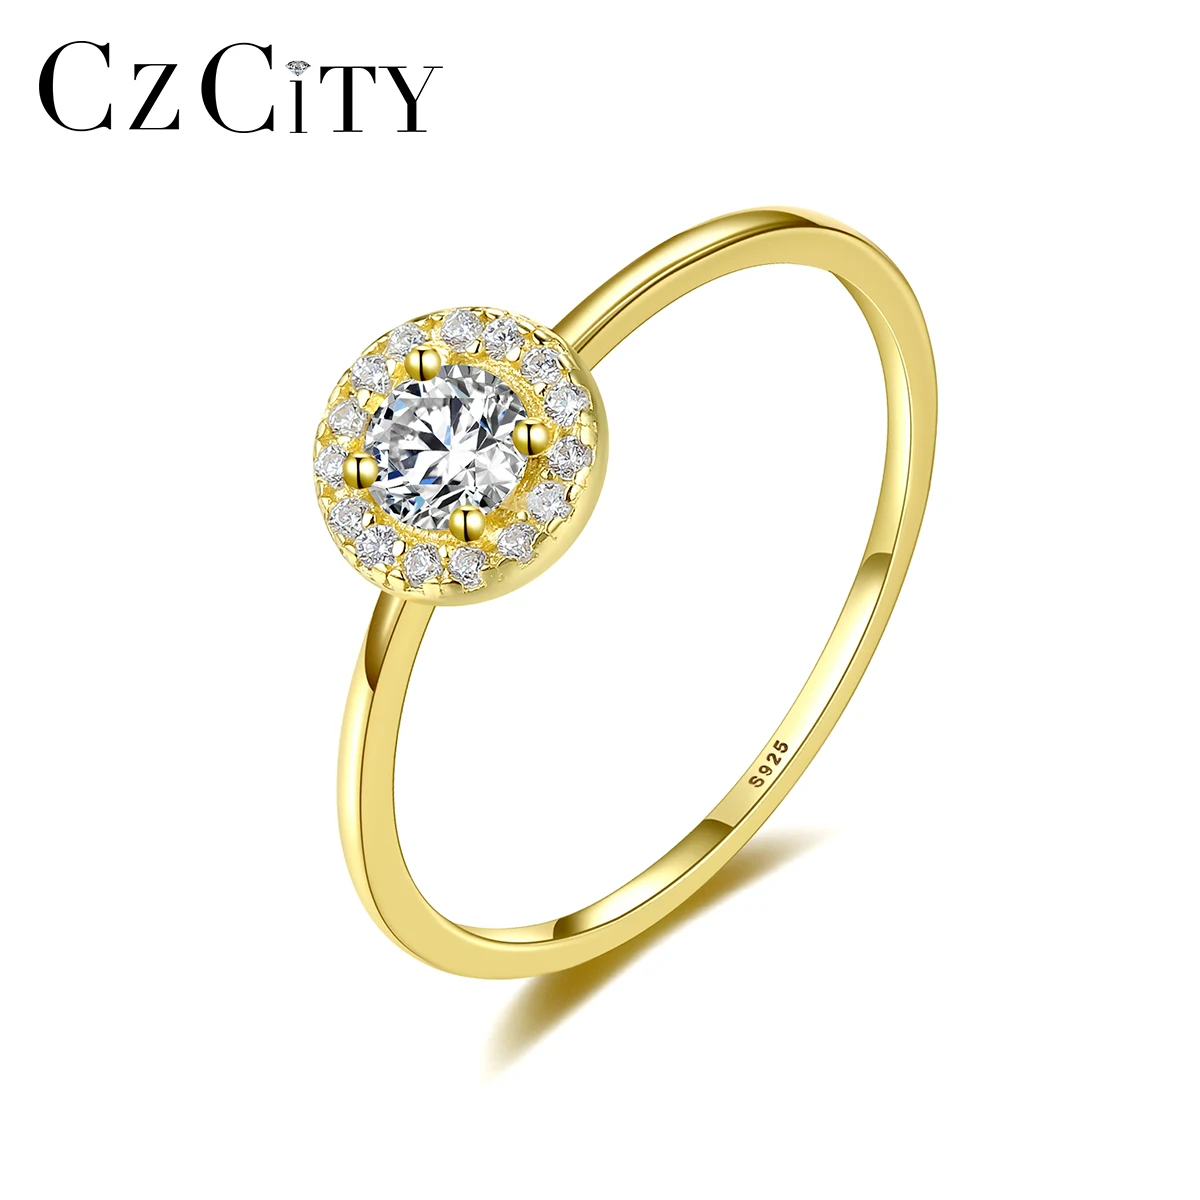 

CZCITY Dainty Gold Plated Sterling Silver Engagement Wedding Rings Cubic Zirconia Girls Fashion Ring